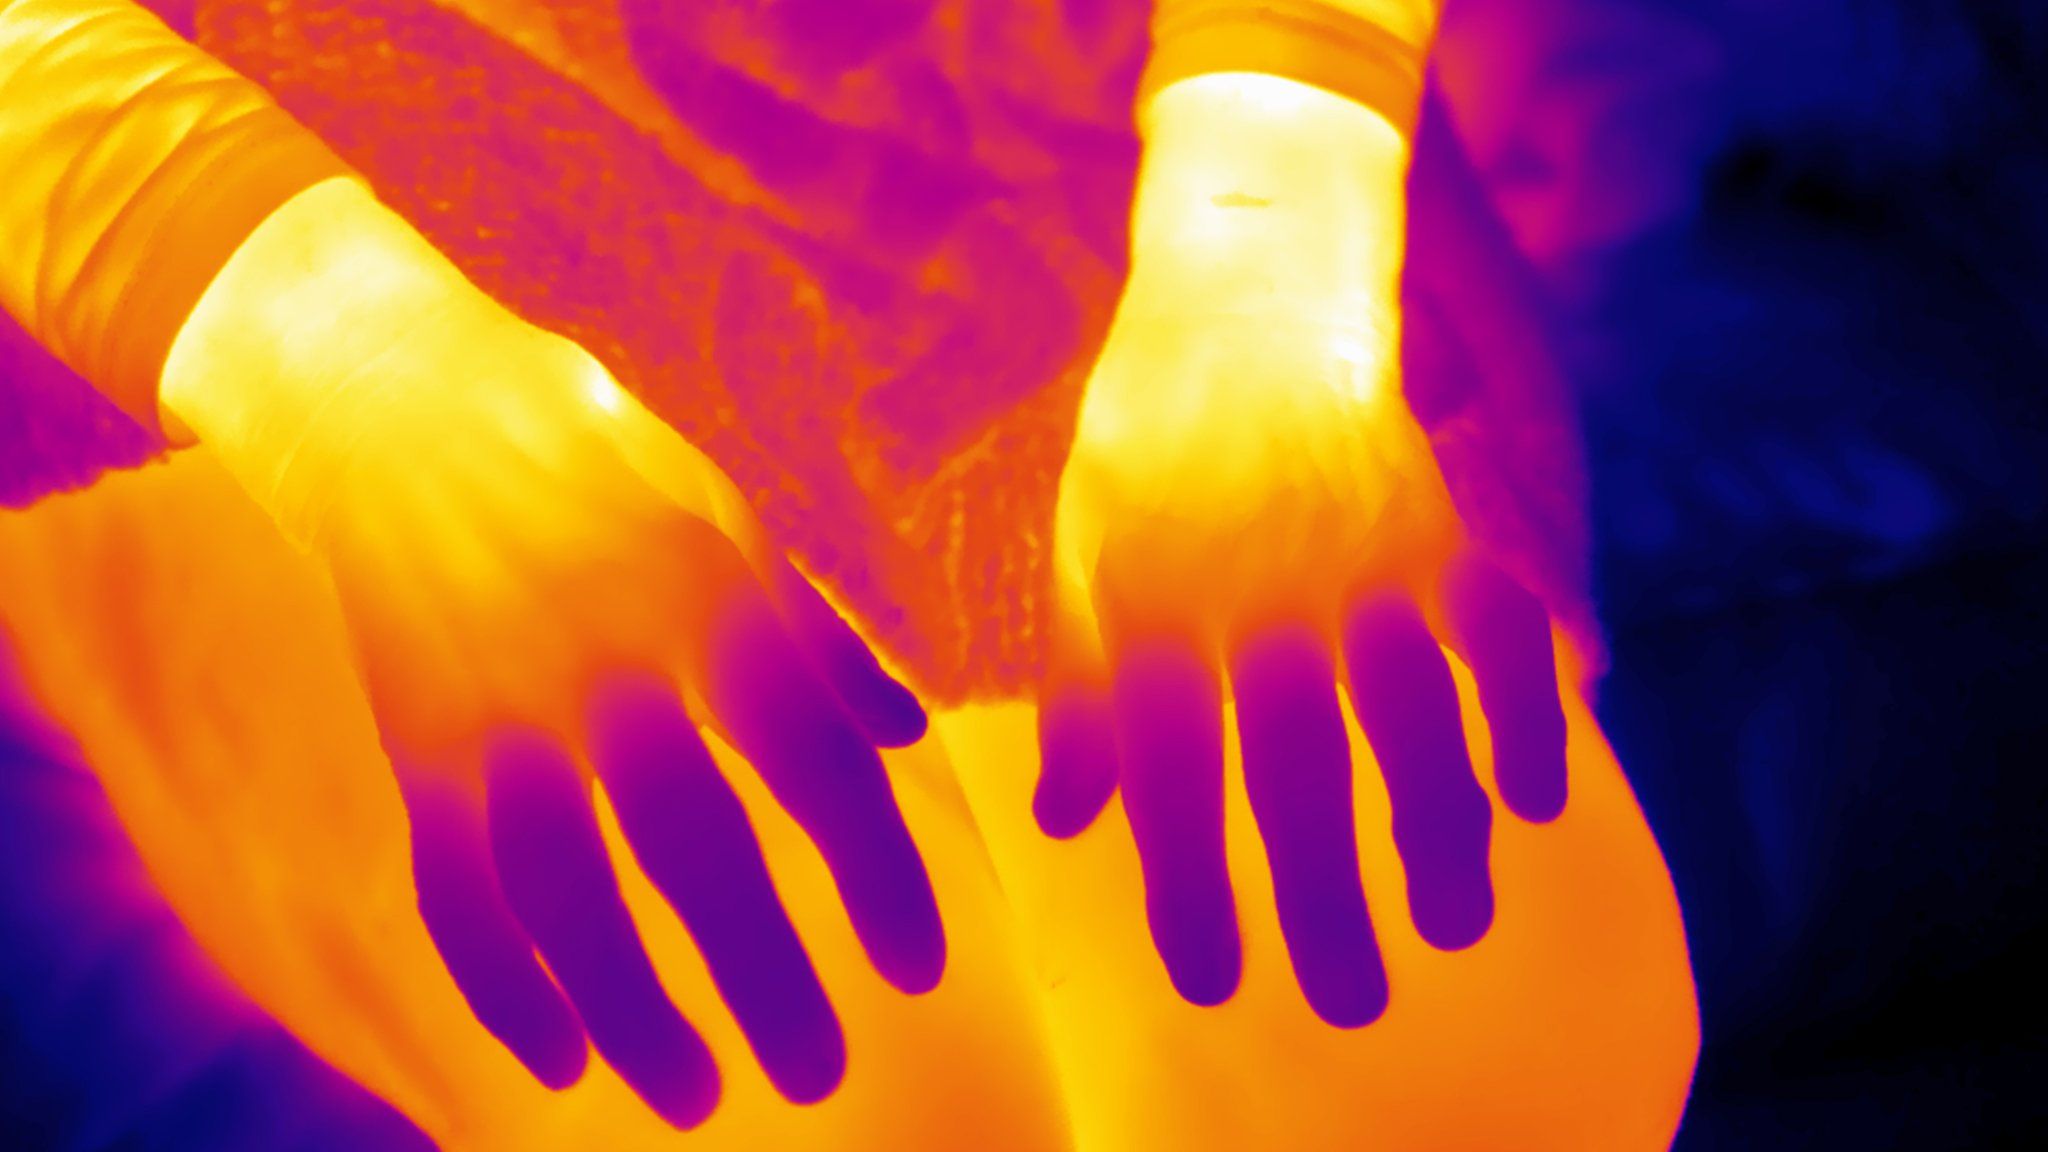 Thermal images of Audrey's hands